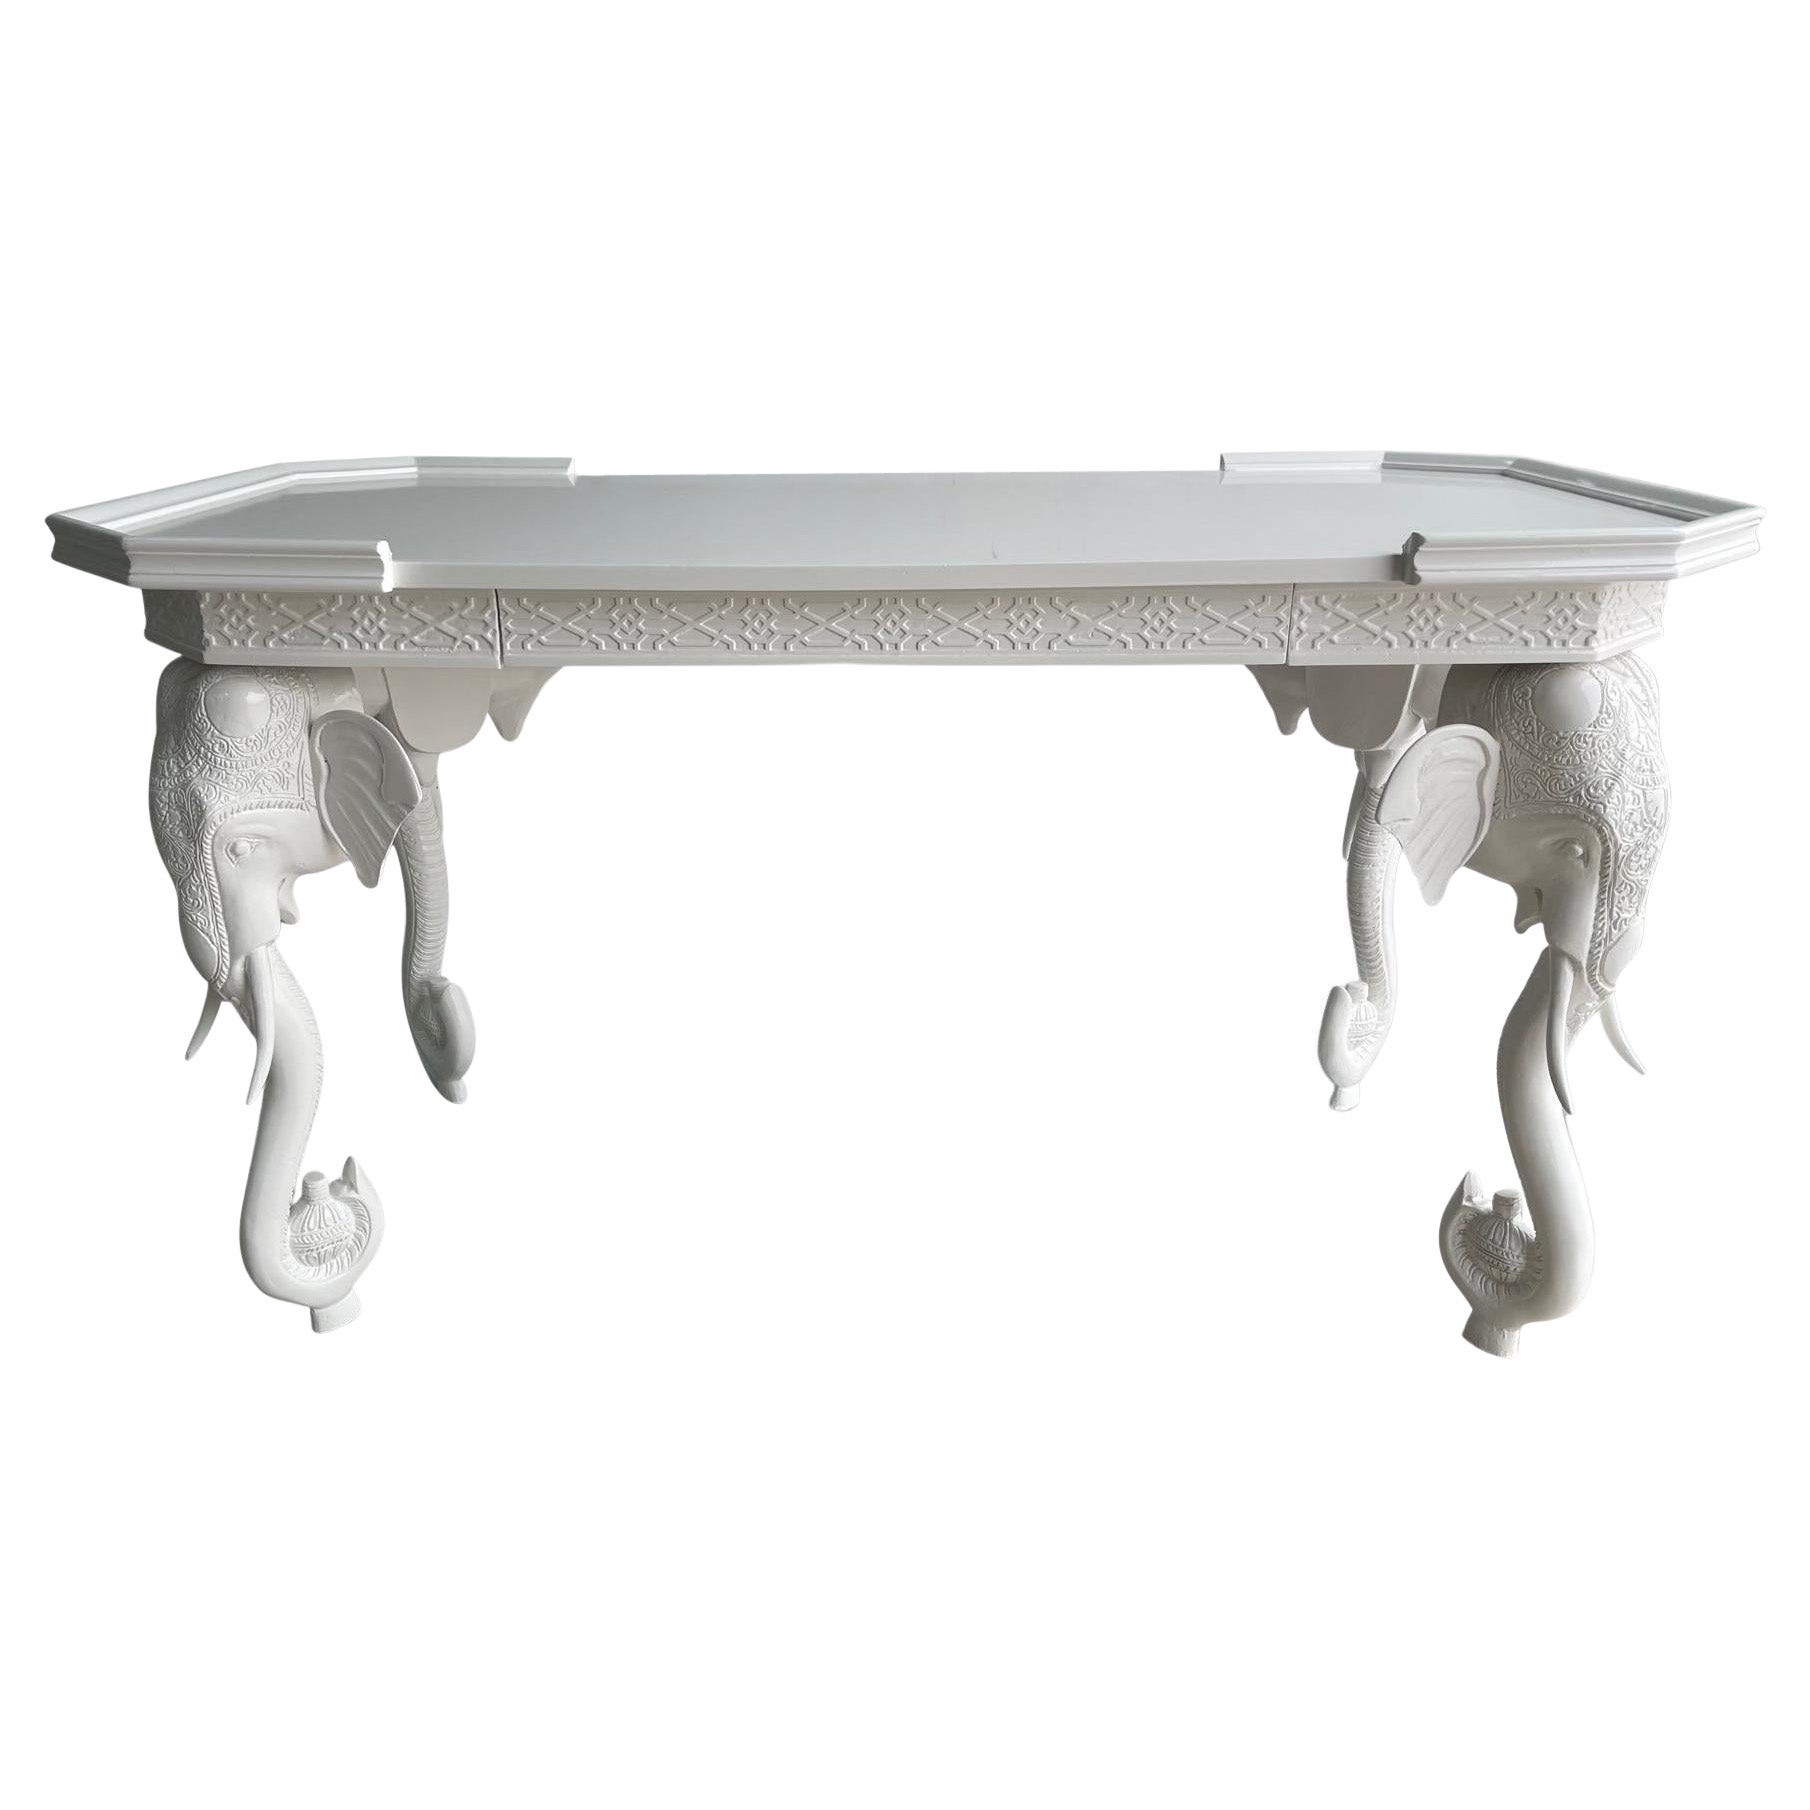 Hollywood Regency White Lacquered Desk or Console by Gampel-Stoll